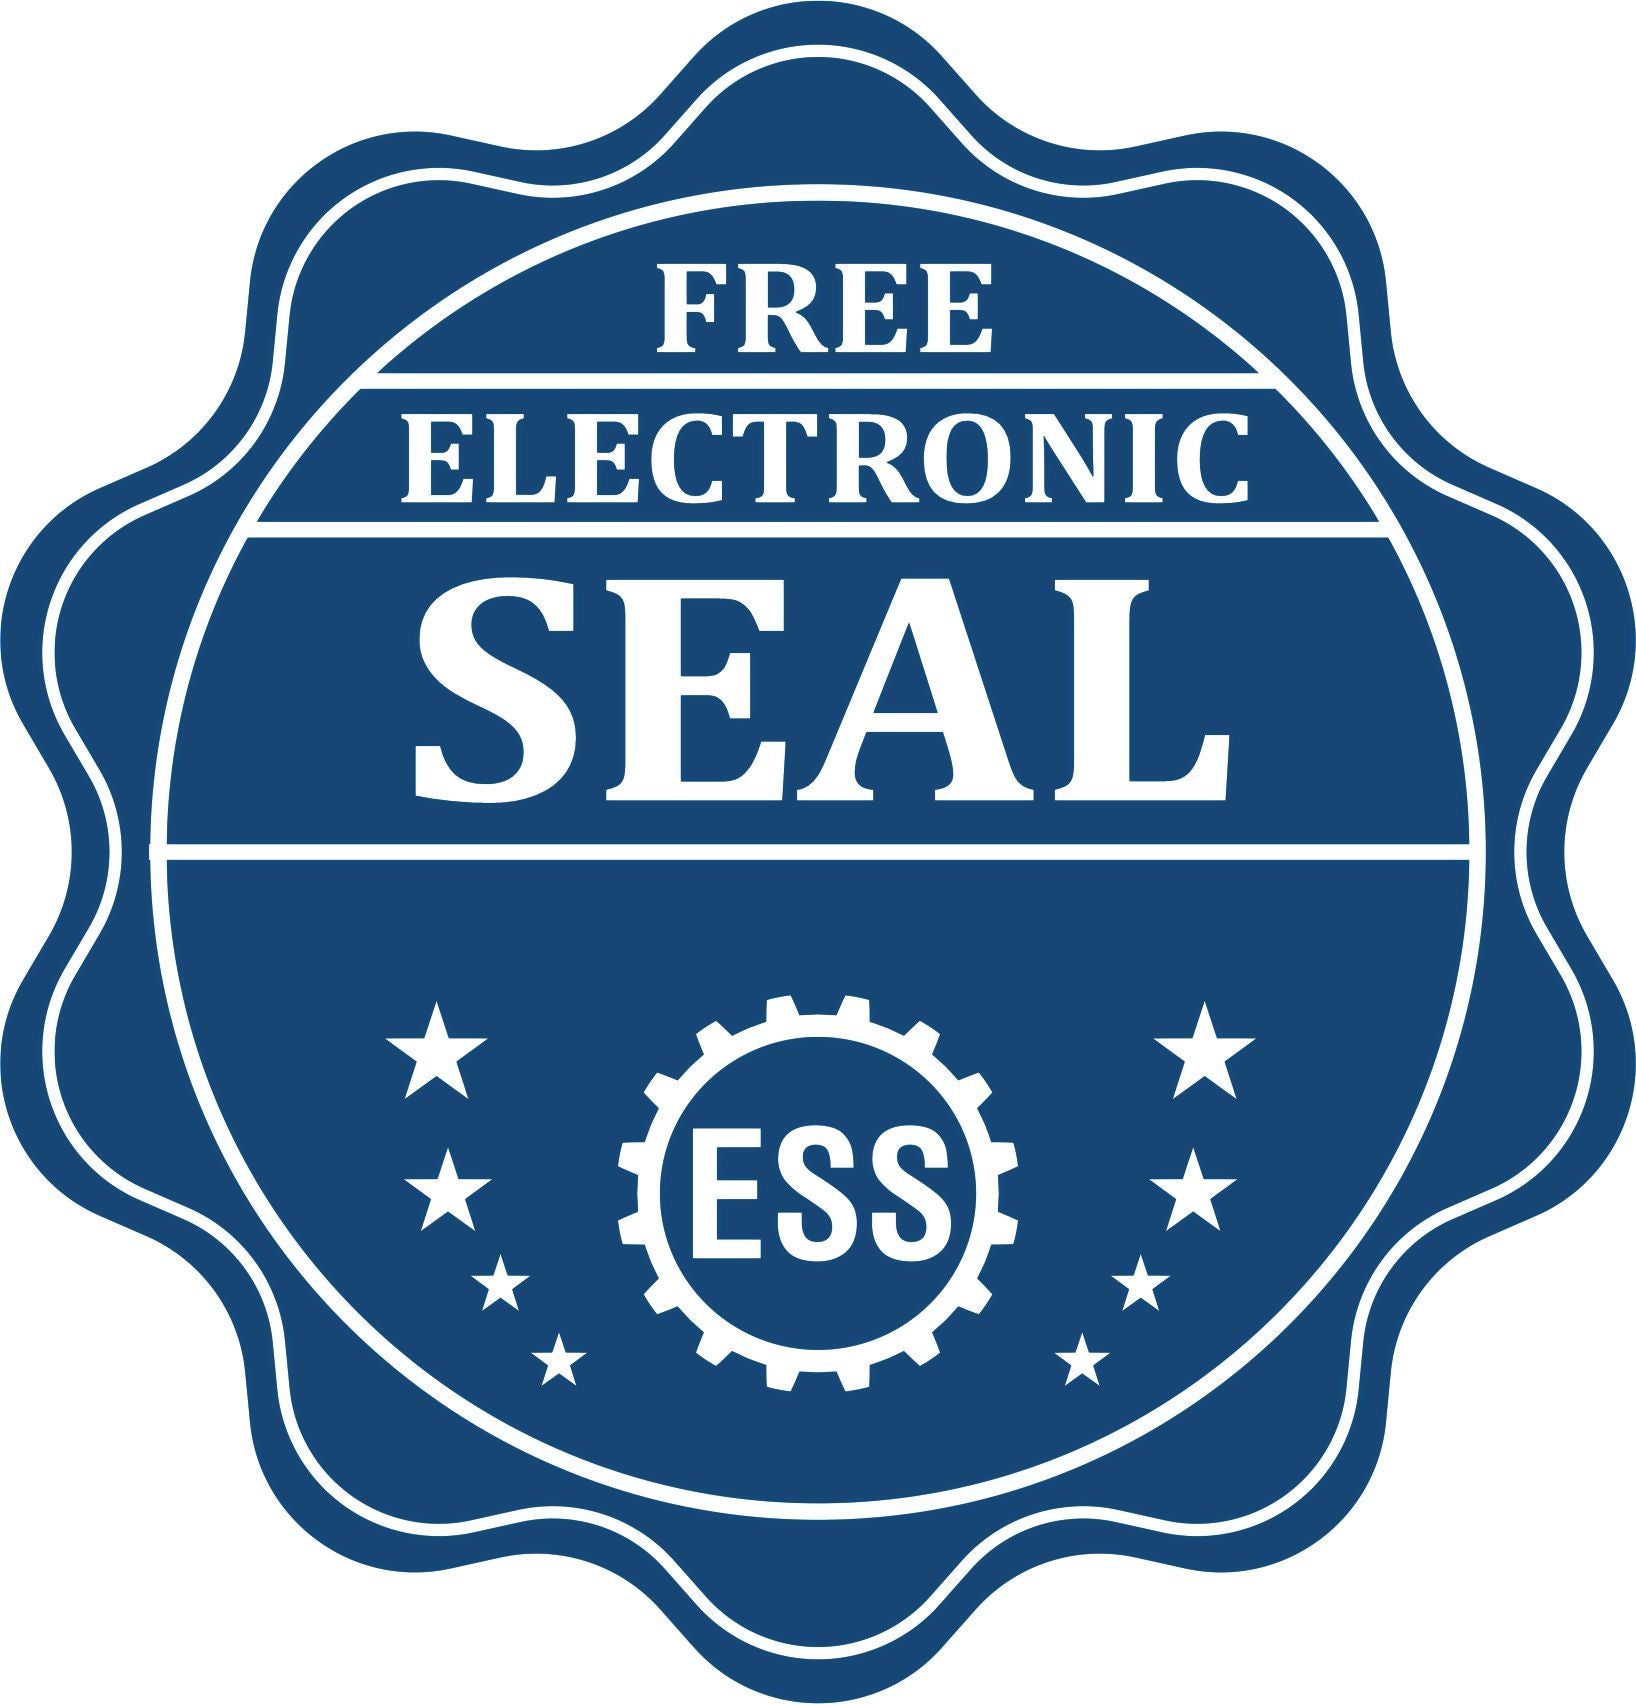 A badge showing a free electronic seal for the MaxLight Premium Pre-Inked Kentucky State Seal Notarial Stamp with stars and the ESS gear on the emblem.